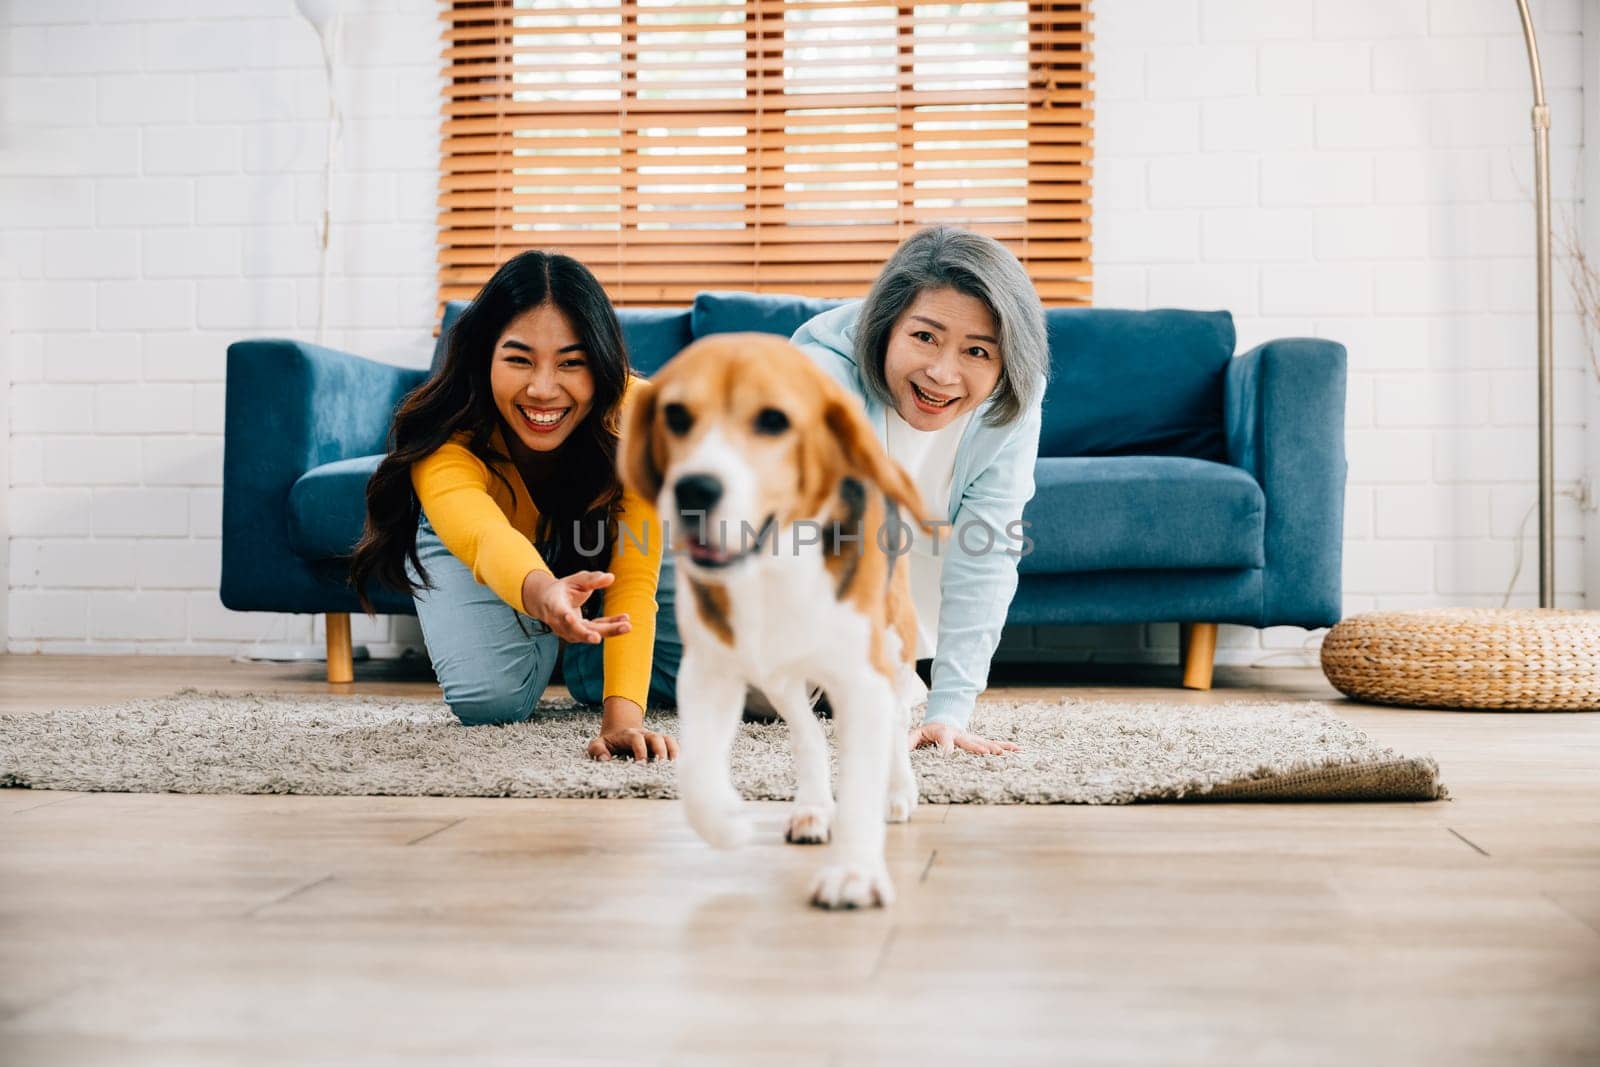 In the comfort of their home, a cheerful woman and her mother playfully run with their Beagle dog in the living room. Their friendly bond and weekend activity bring joy to the scene. pet love by Sorapop